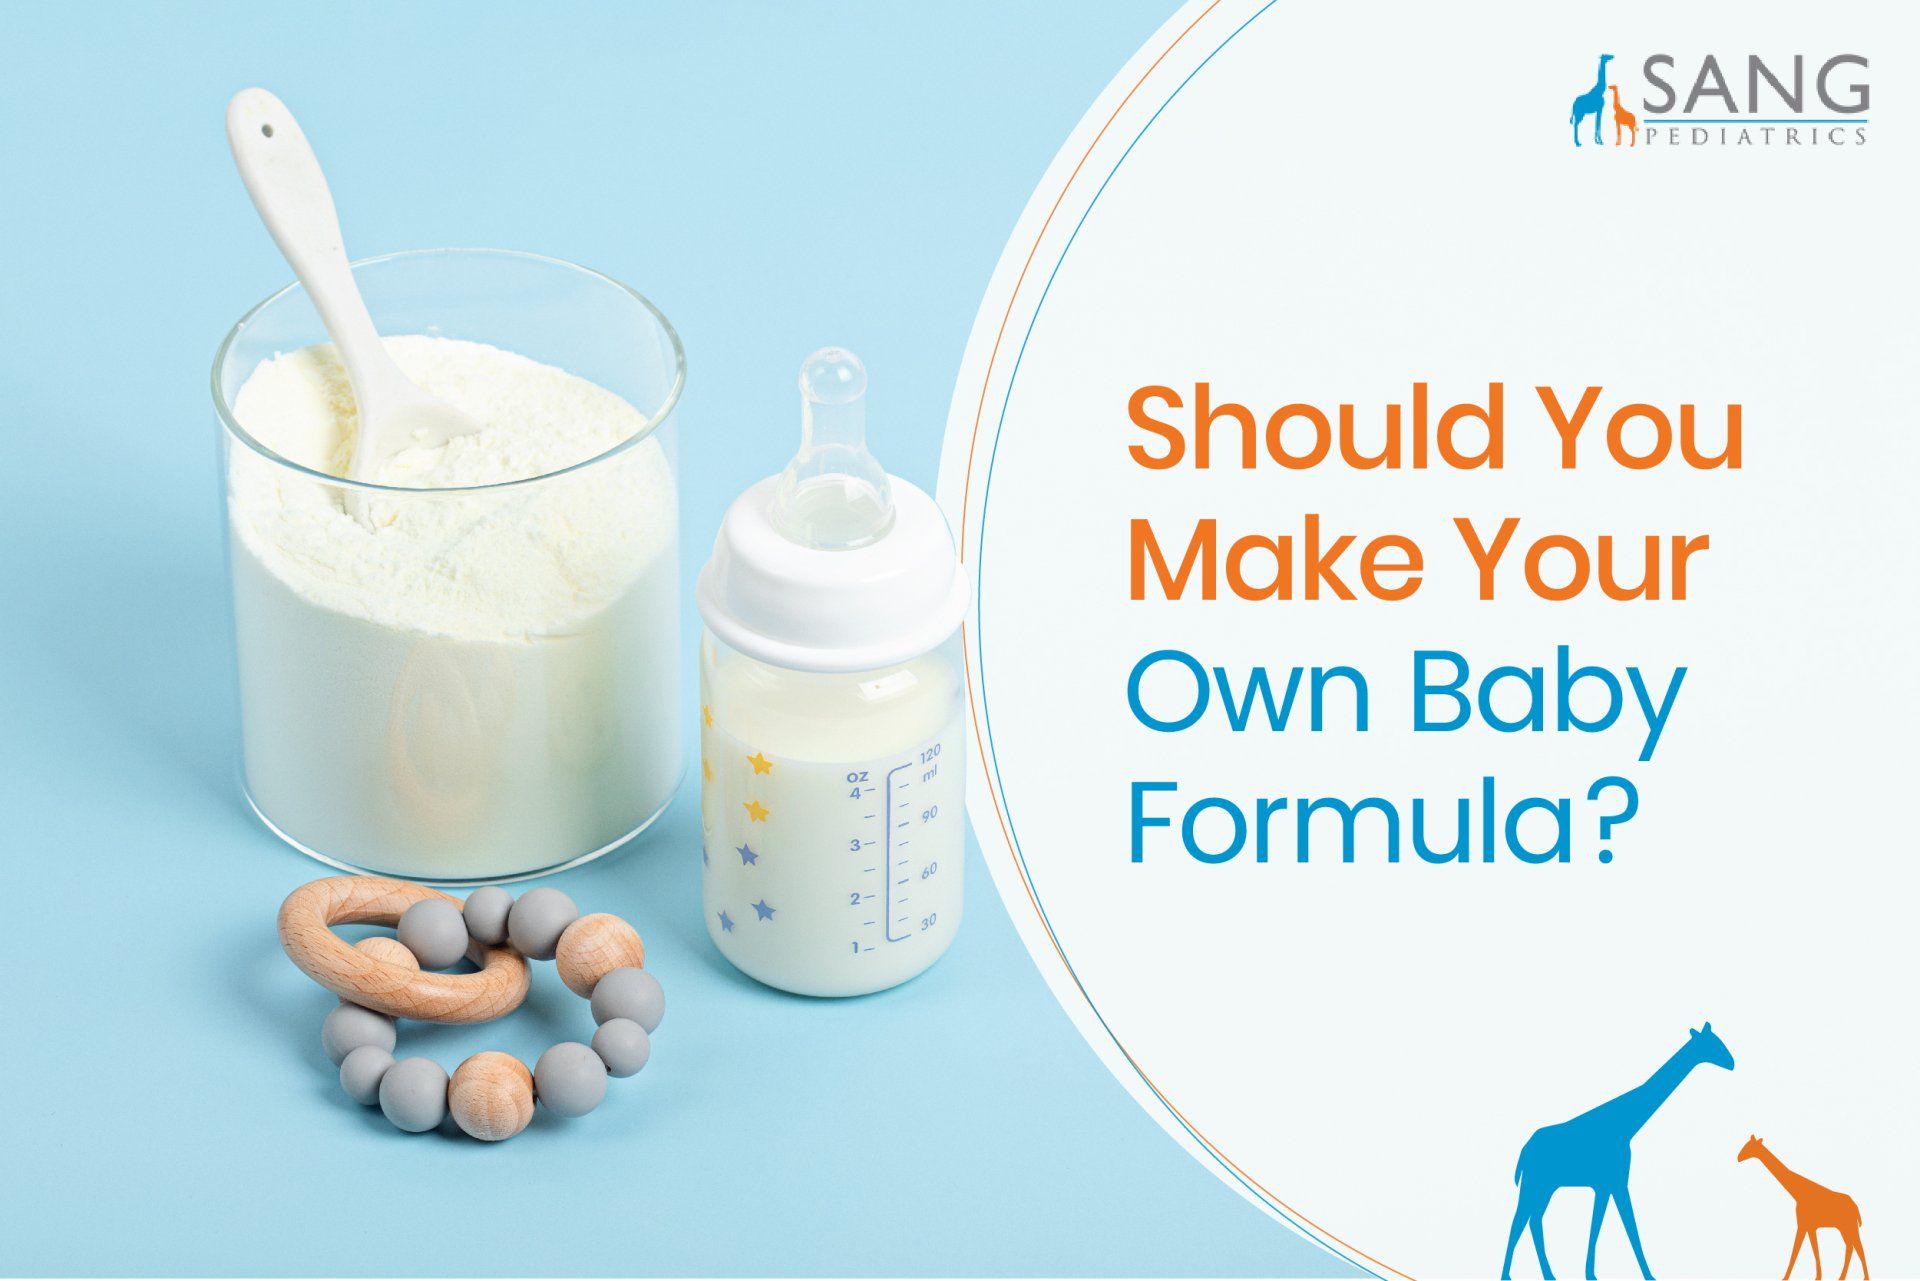 Should You Make Your Own Baby Formula?